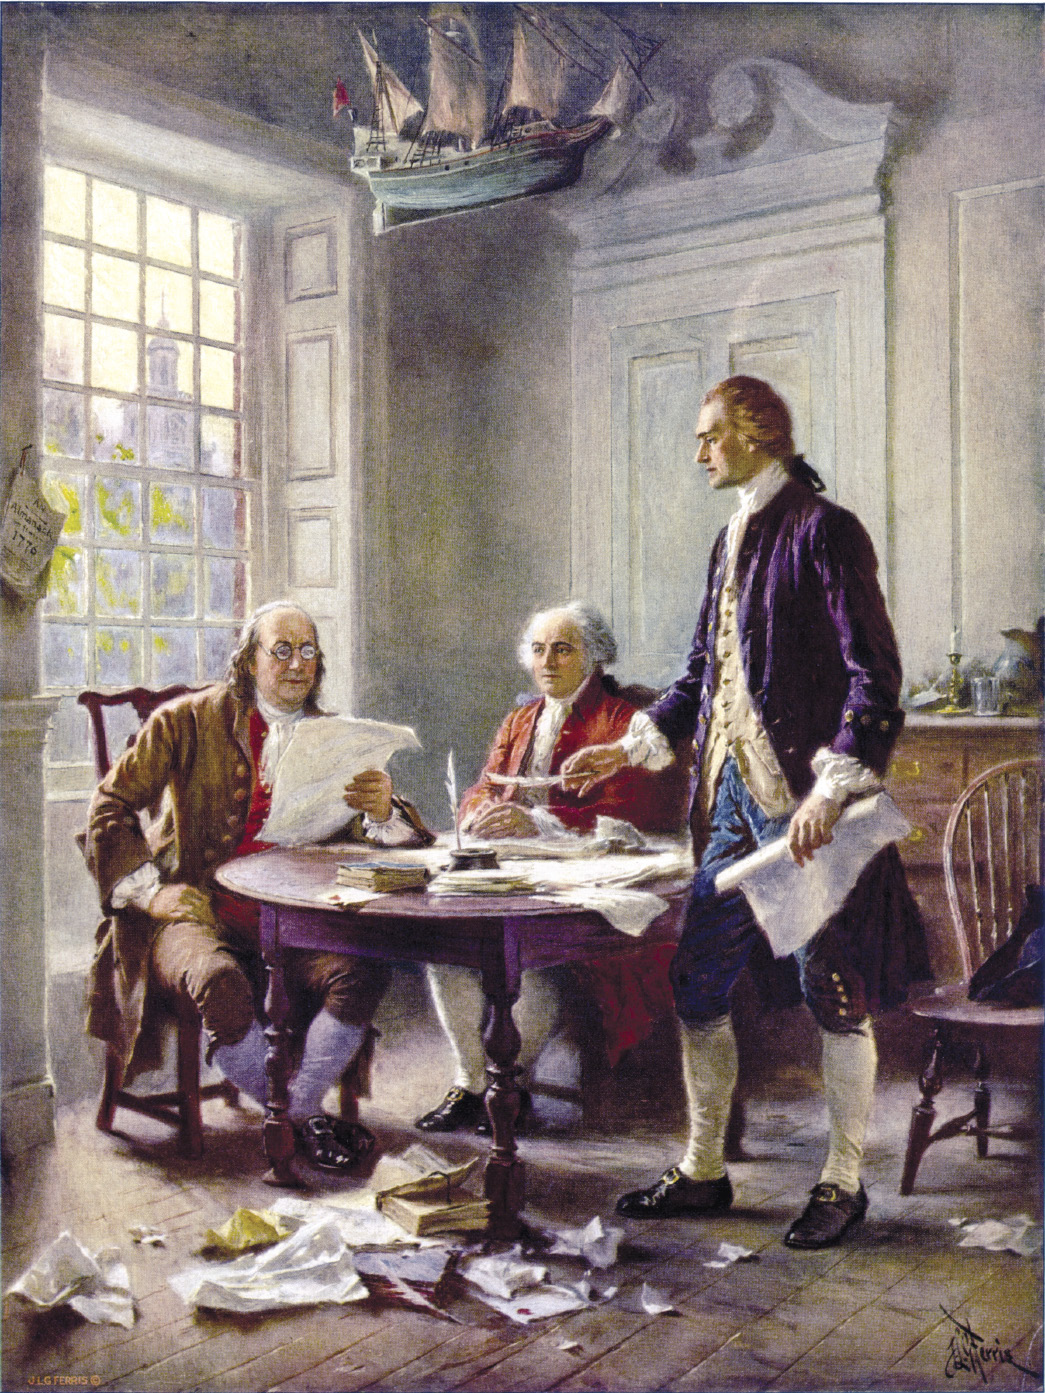 V1-Declaration_of_Independence_1776_painting_Ferris.jpg